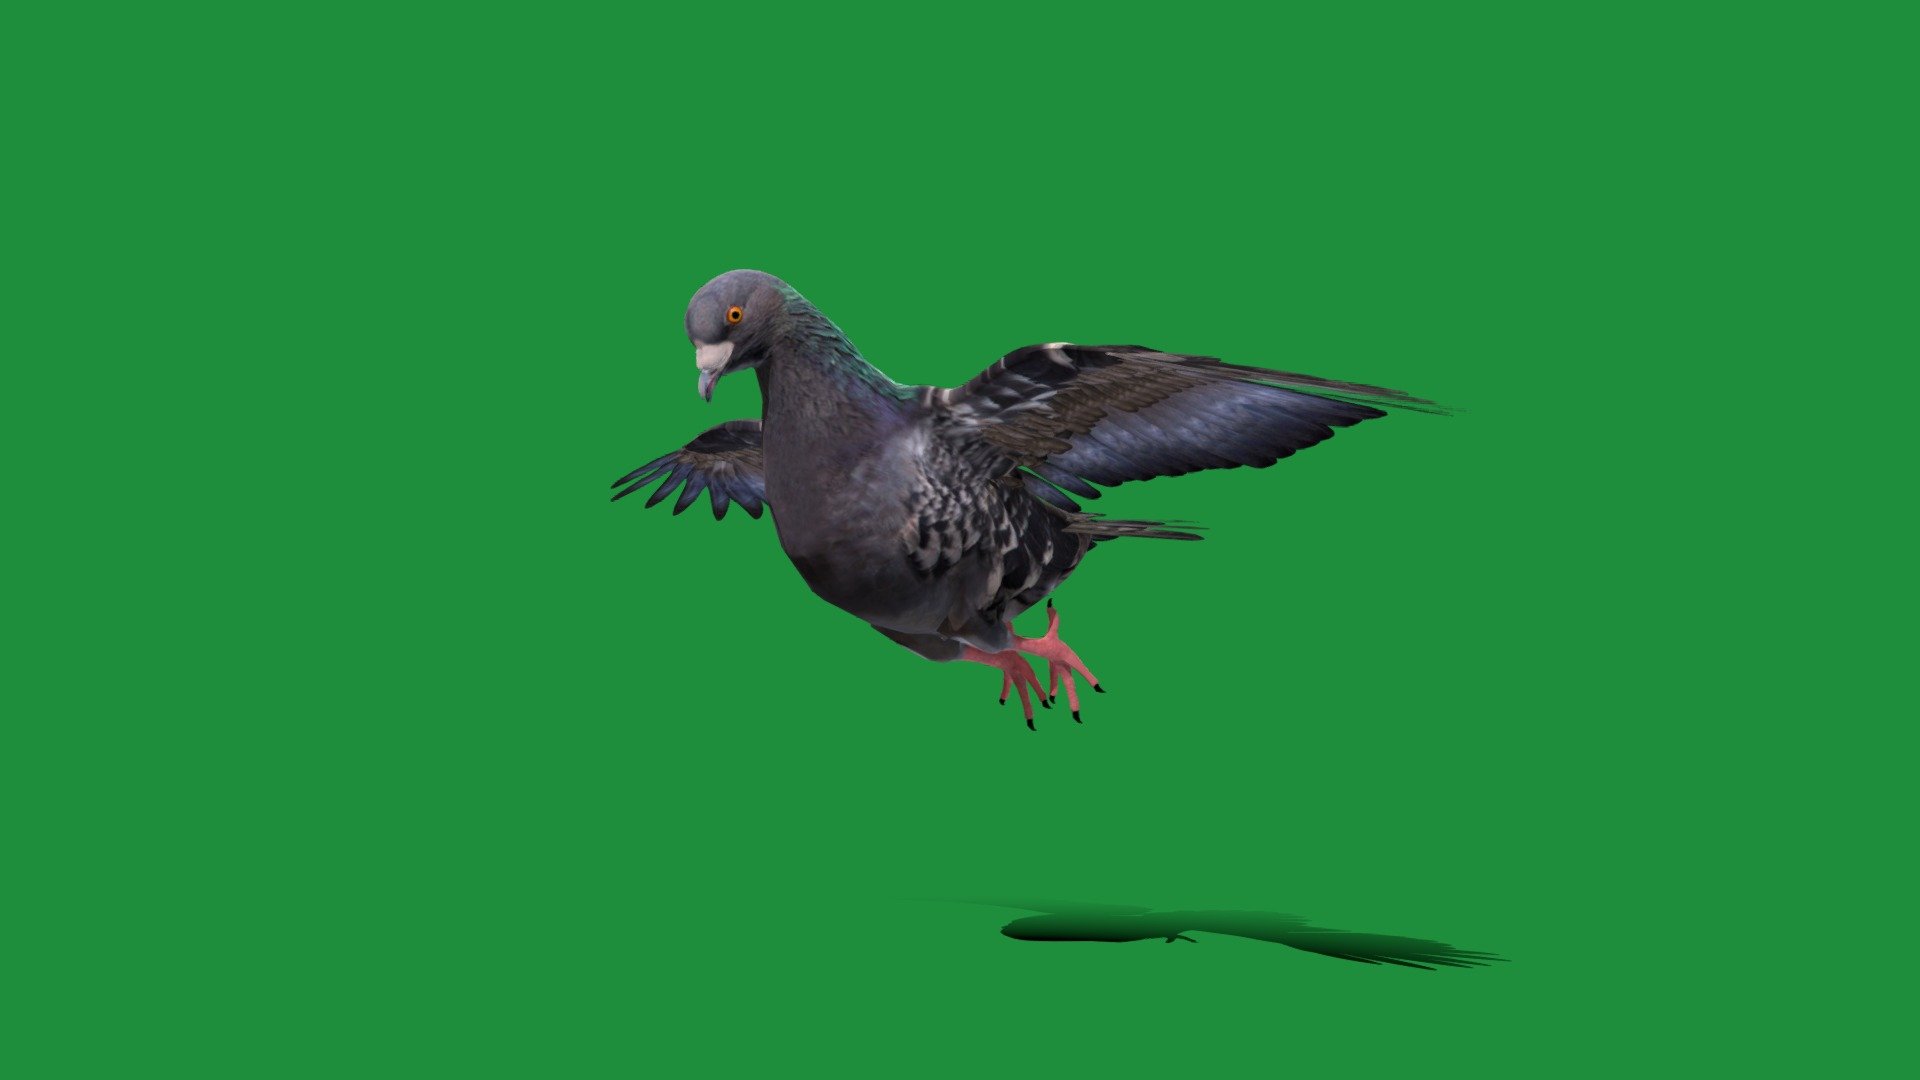 Gascogne Pigeon Bird (domestic pigeon)Bleu de Gascogne,fitness-pigeons,Columbidae

Columba livia Animal Bird Breed (Aves)Pet,Cute

1 Draw Calls

MidPoly

Game Ready (Asset)

Subdivision Surface Ready

Single - Animations 

4K PBR Textures 1 Material

Unreal/Unity FBX 

Blend File 3.6.5 LTS / 4 Plus

USDZ File (AR Ready). Real Scale Dimension (Xcode ,Reality Composer, Keynote Ready)

Textures Files

GLB File (Unreal 5.1 Plus Native Support,Gadot)


Gltf File ( Spark AR, Lens Studio(SnapChat) , Effector(Tiktok) , Spline, Play Canvas,Omiverse ) Compatible




Triangles -21094



Faces -13036

Edges -30803

Vertices -18022

 Diffuse, Metallic, Roughness , Normal Map ,Specular Map,AO

The Gascony blue has as its ancestor the rock pigeon , but it is very close in its plumage and its conformation to the woodpigeon and even more to the stock dove 3d model